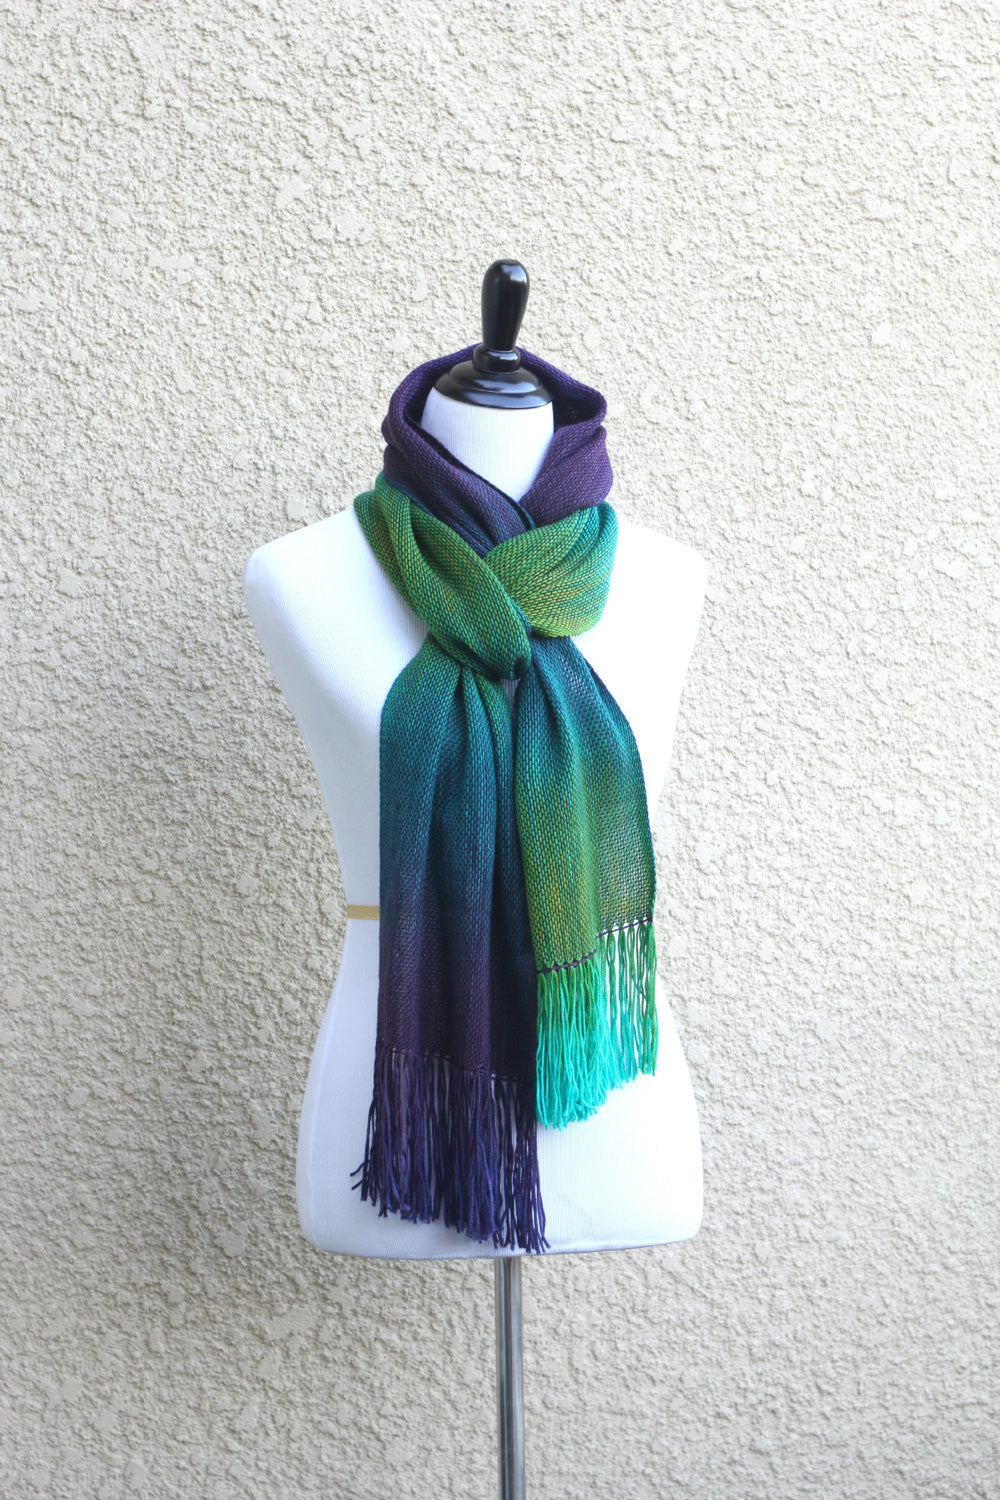 Green and purple woven scarf